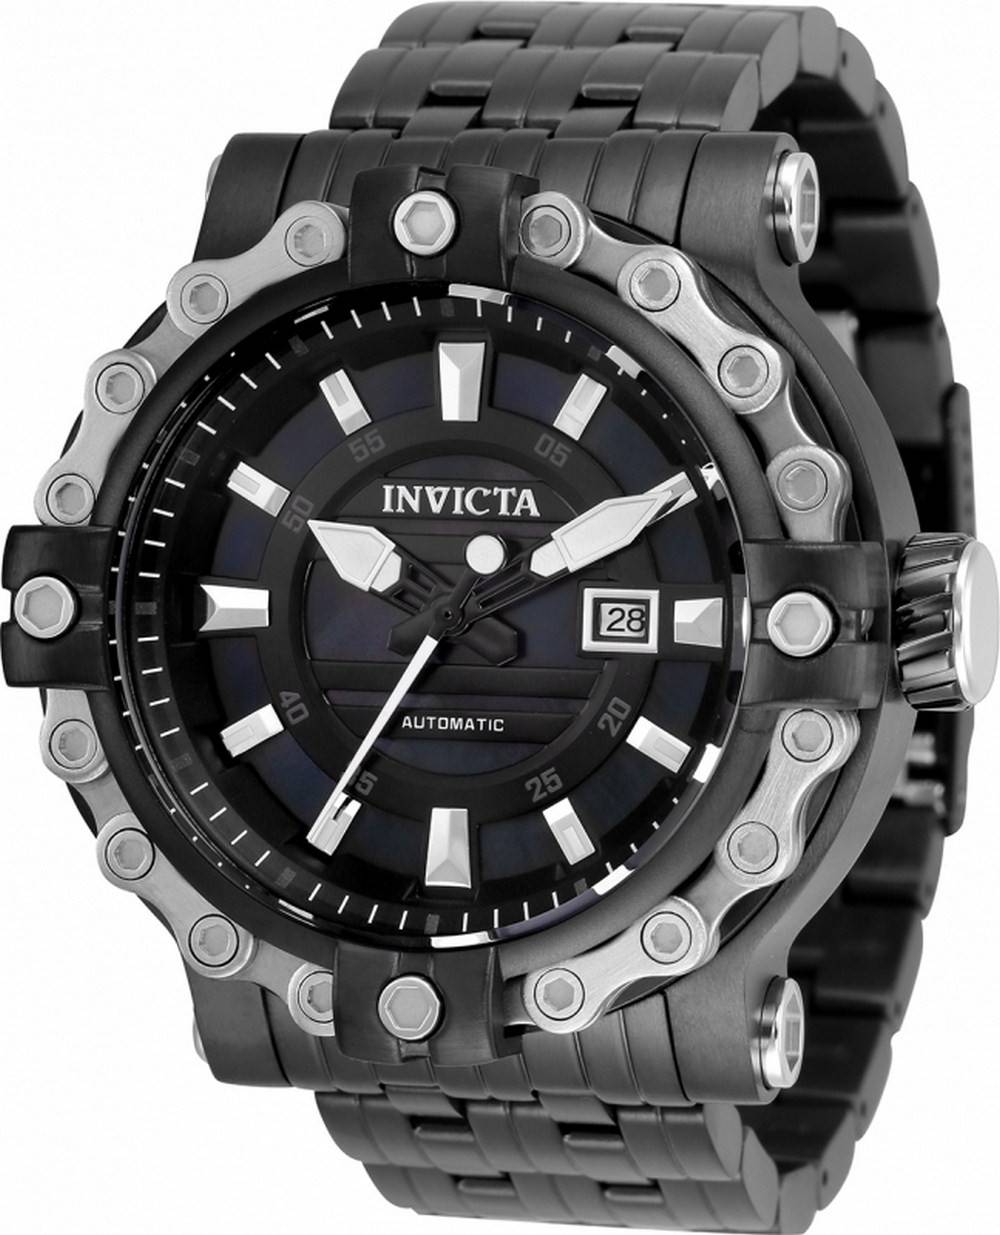 Invicta Excursion Black Dial Stainless Steel Automatic 35181 100M Mens Watch